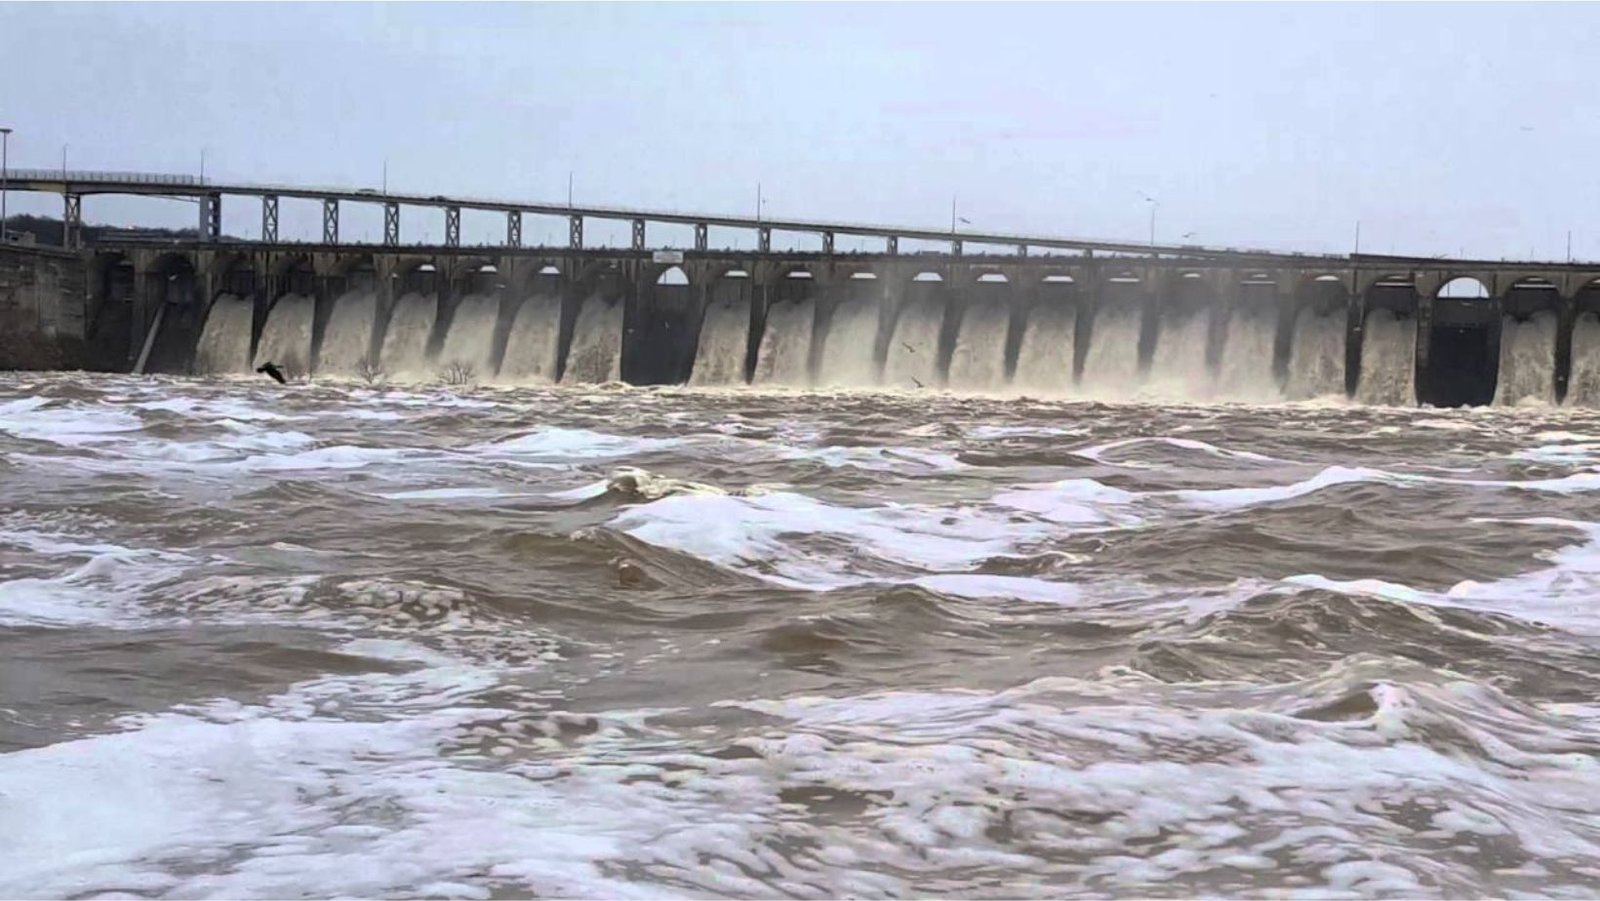 Disaster Management issues high-level flood alert in Indus river